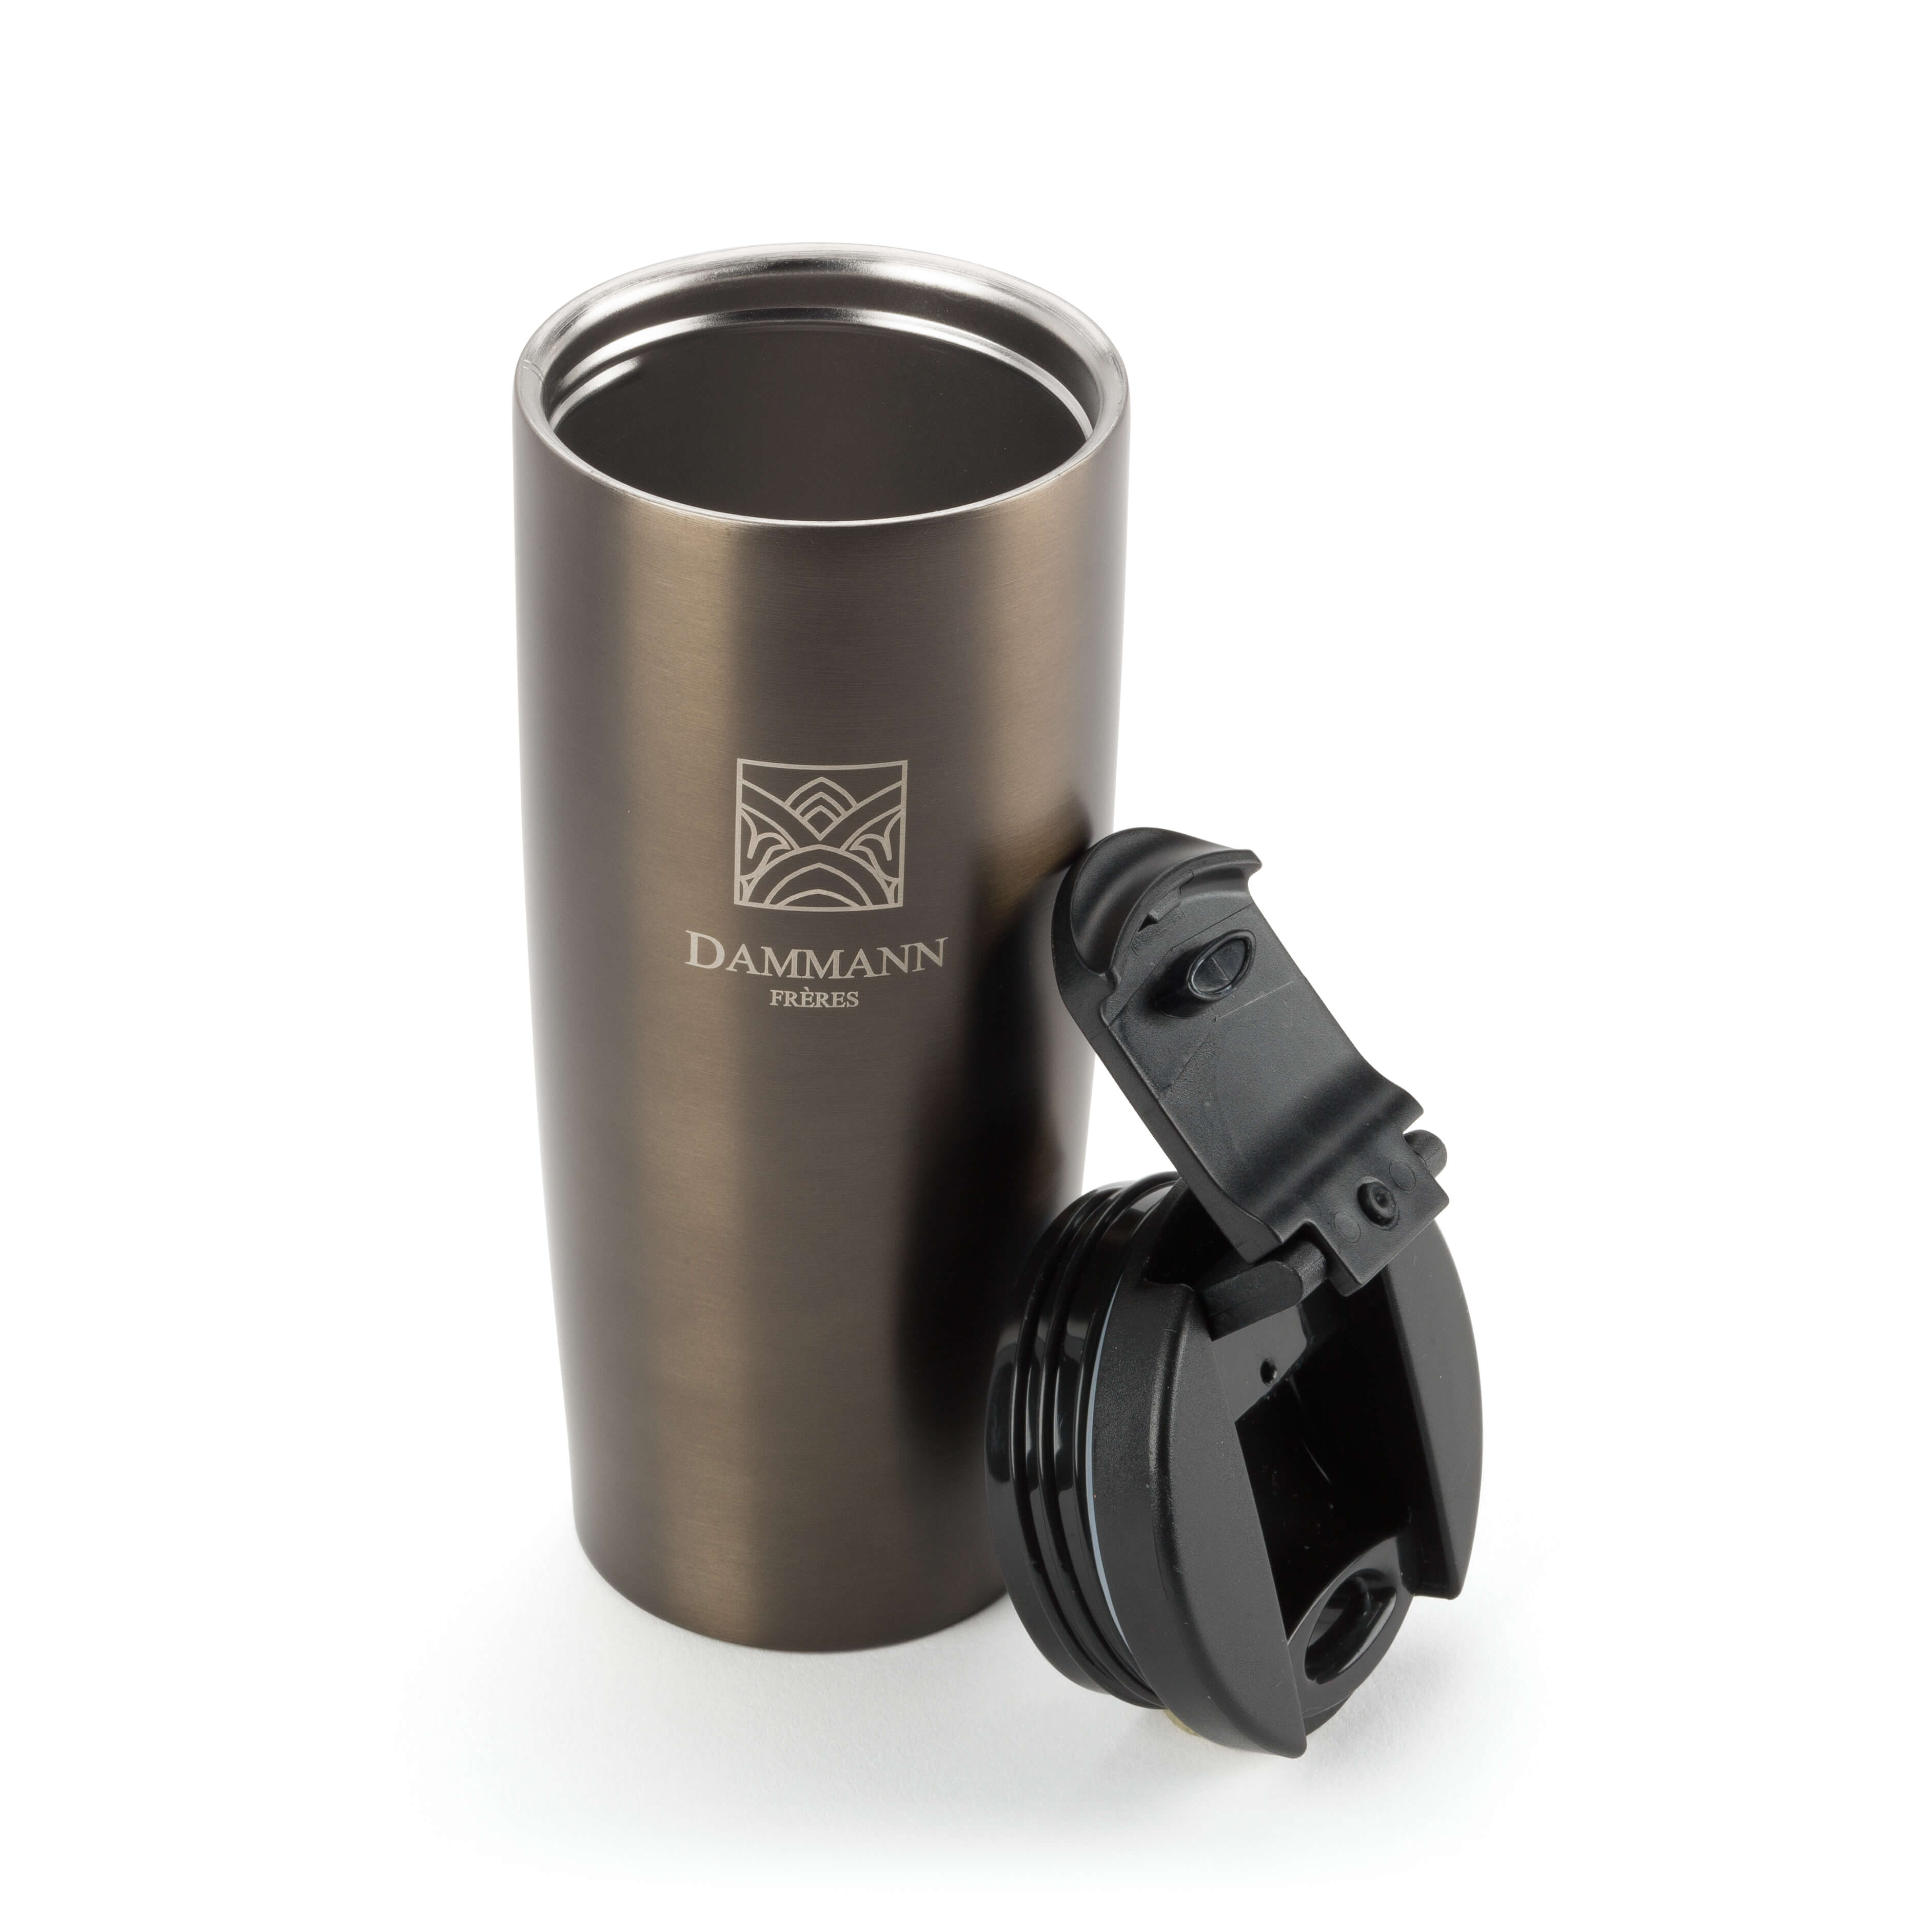 Dammann Frères "Nomade" Isothermal Bronzed Travel Mug, Caddy / Container, 18-20-9922